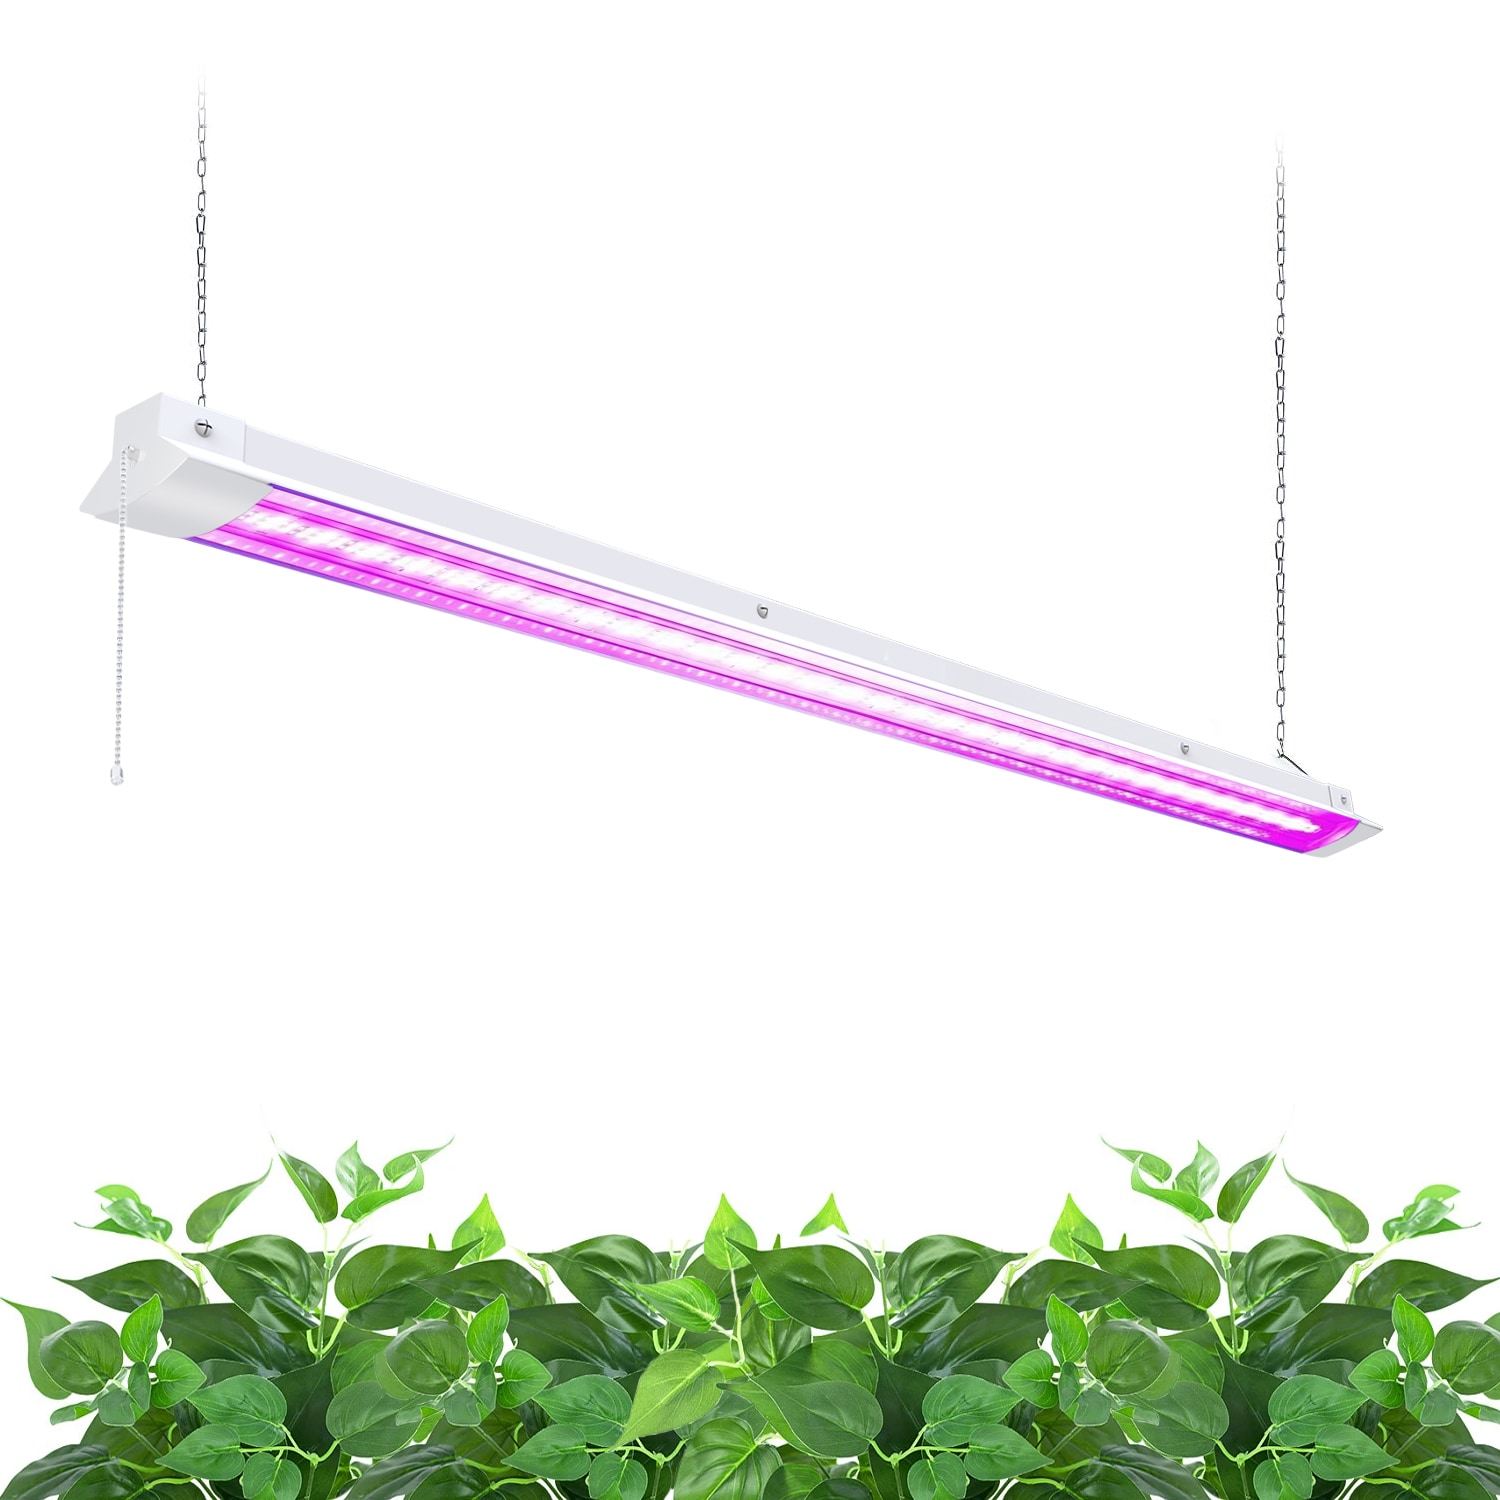 Monios-L LED Grow Light Full Spectrum 30W 2ft T5 High Output Integrated Fixture with Reflector Combo for Indoor Plants 